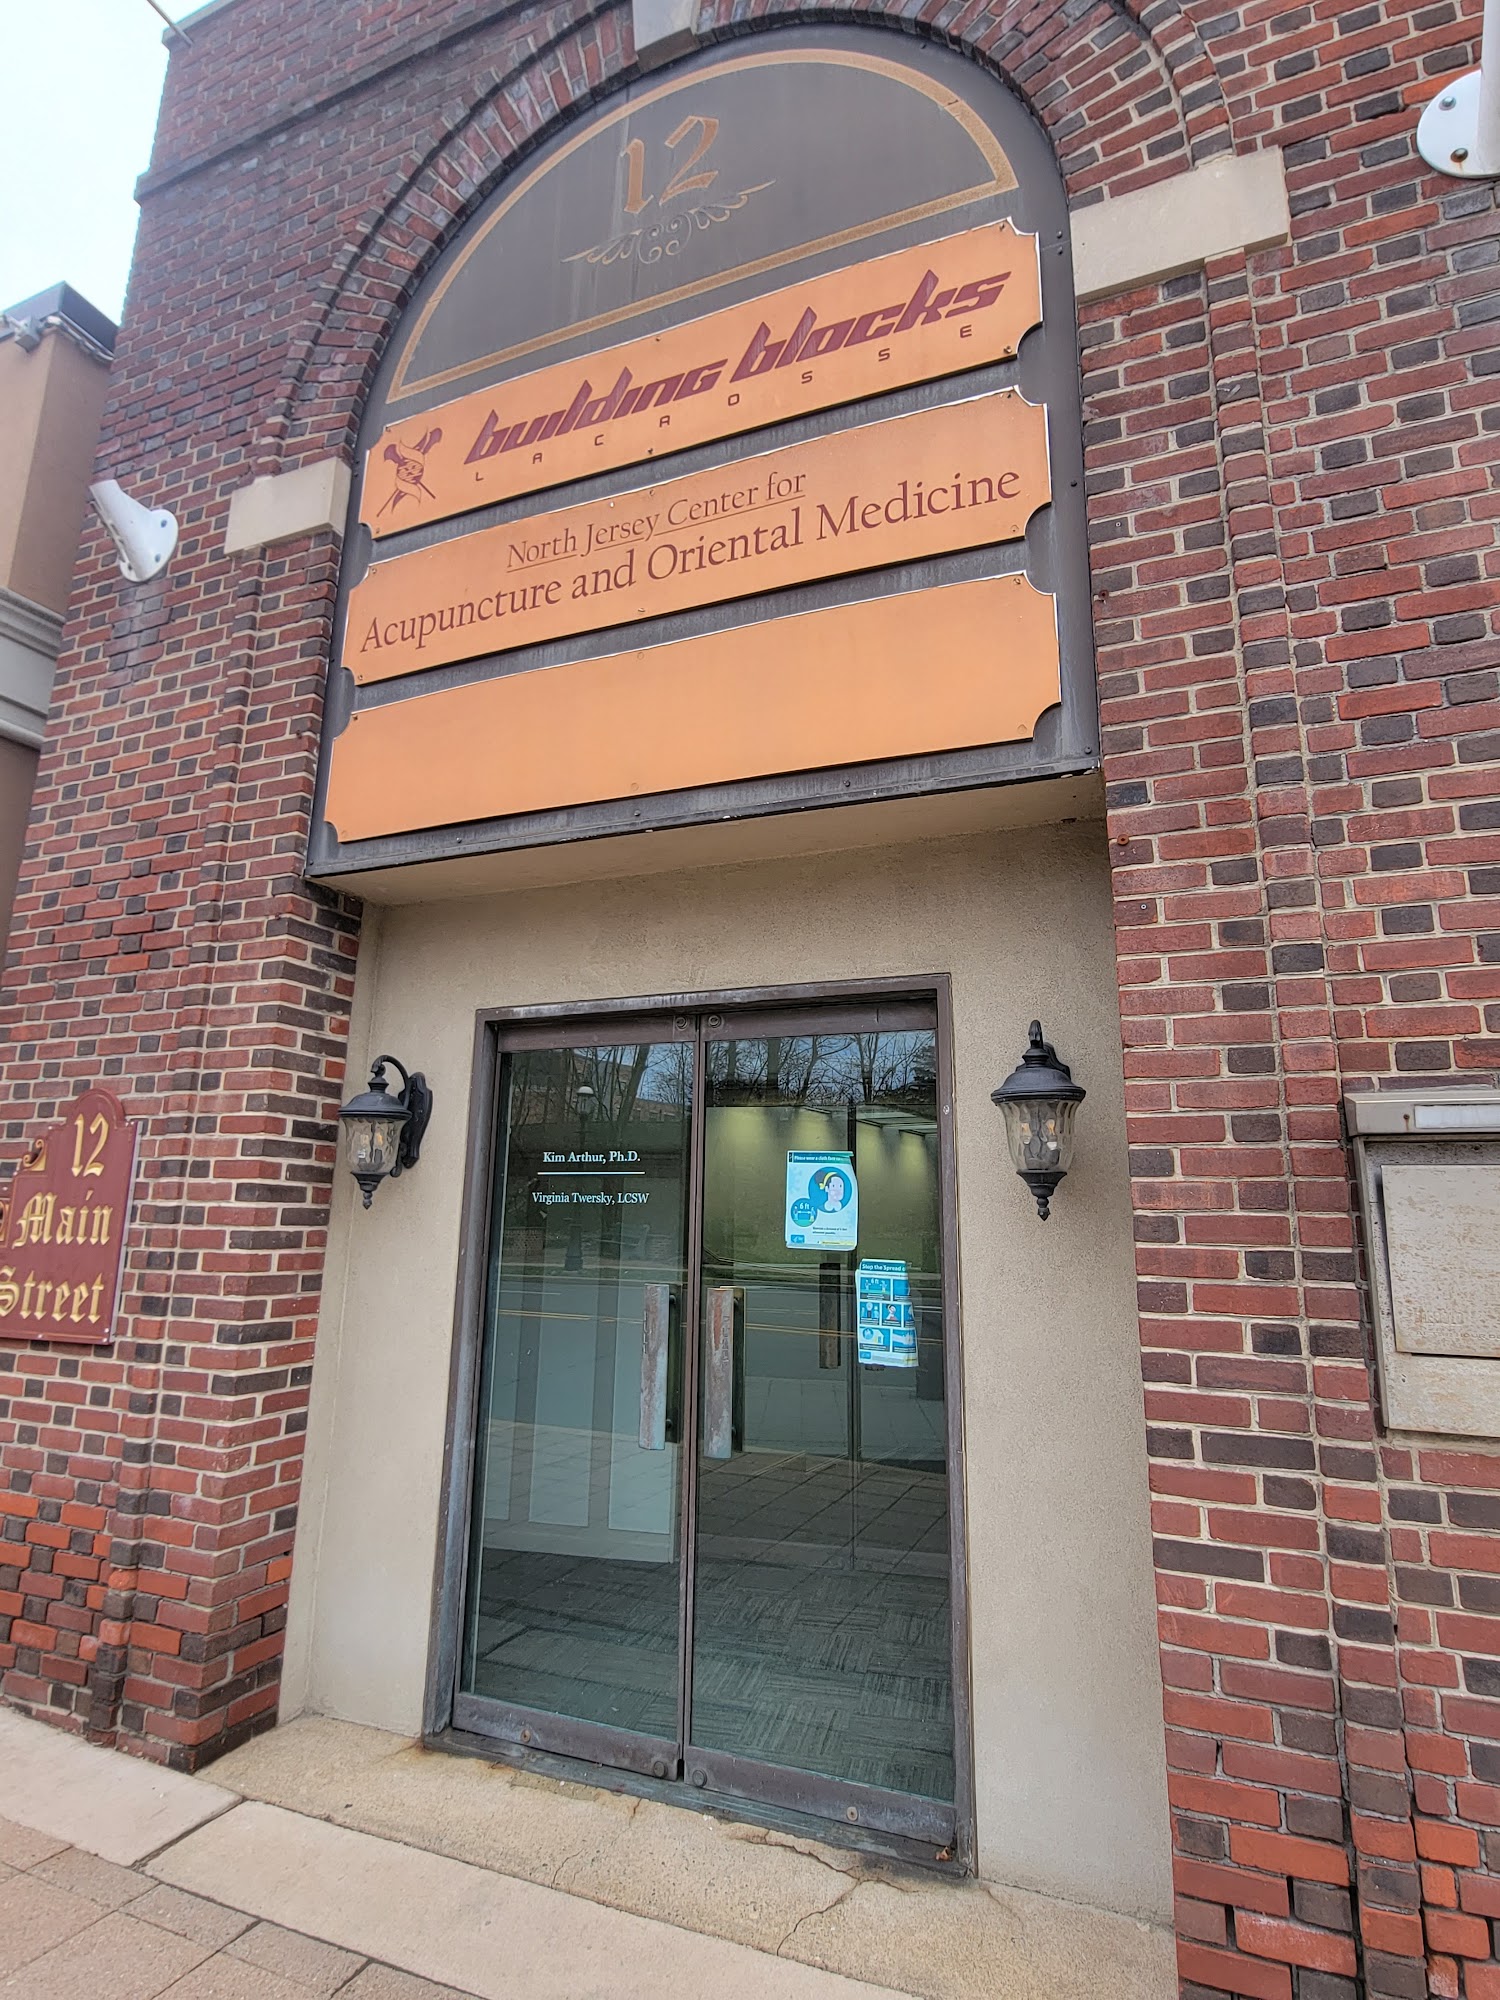 North Jersey Center for Acupuncture and Oriental Medicine 12 Main St, Madison New Jersey 07940